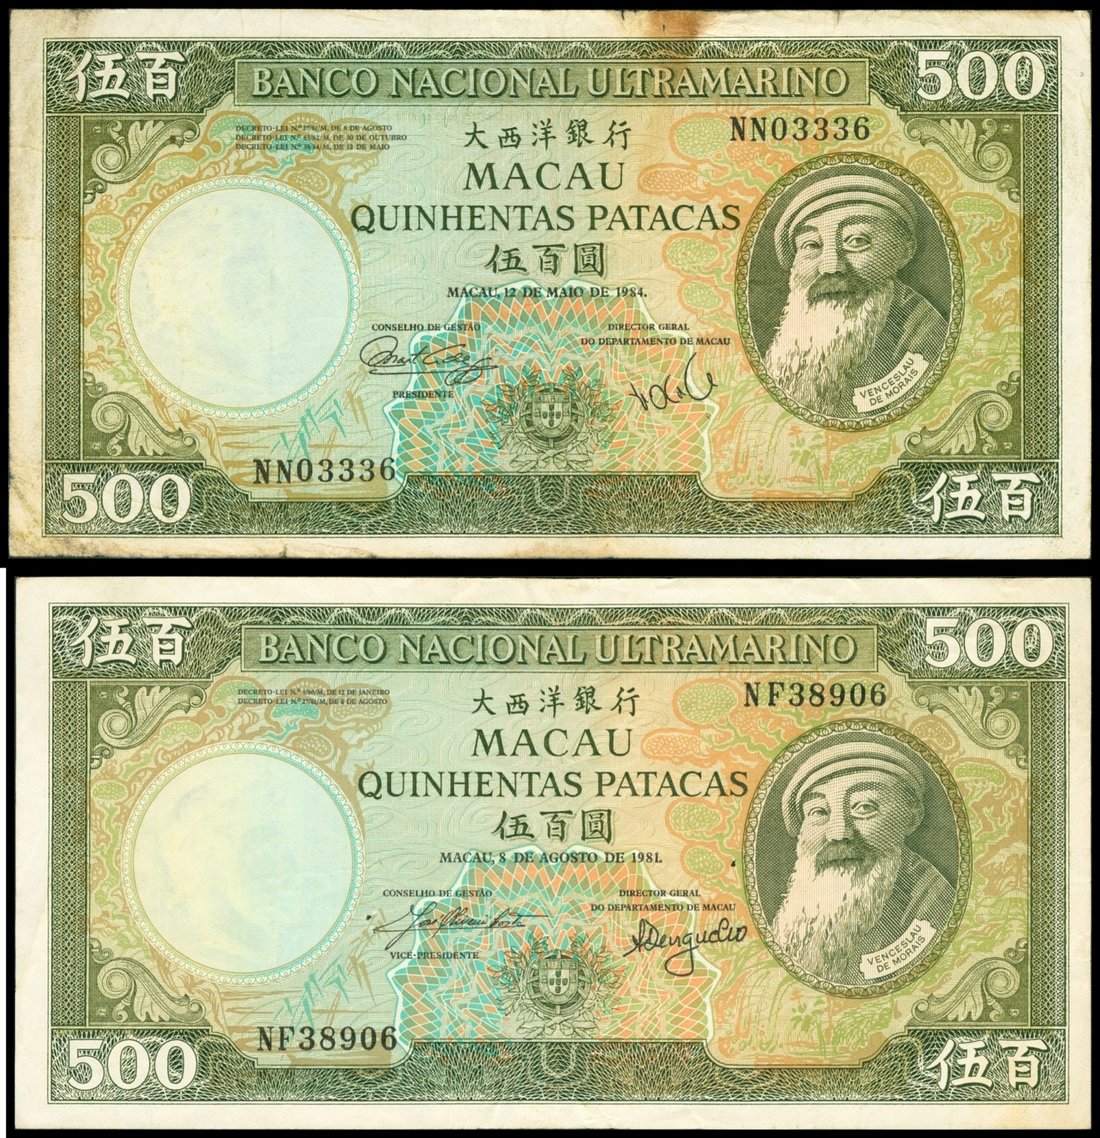 Banco Nacional Ultramarino, a pair of 500 patacas, 1981 and 1984, serial number NF38906 and NN03336